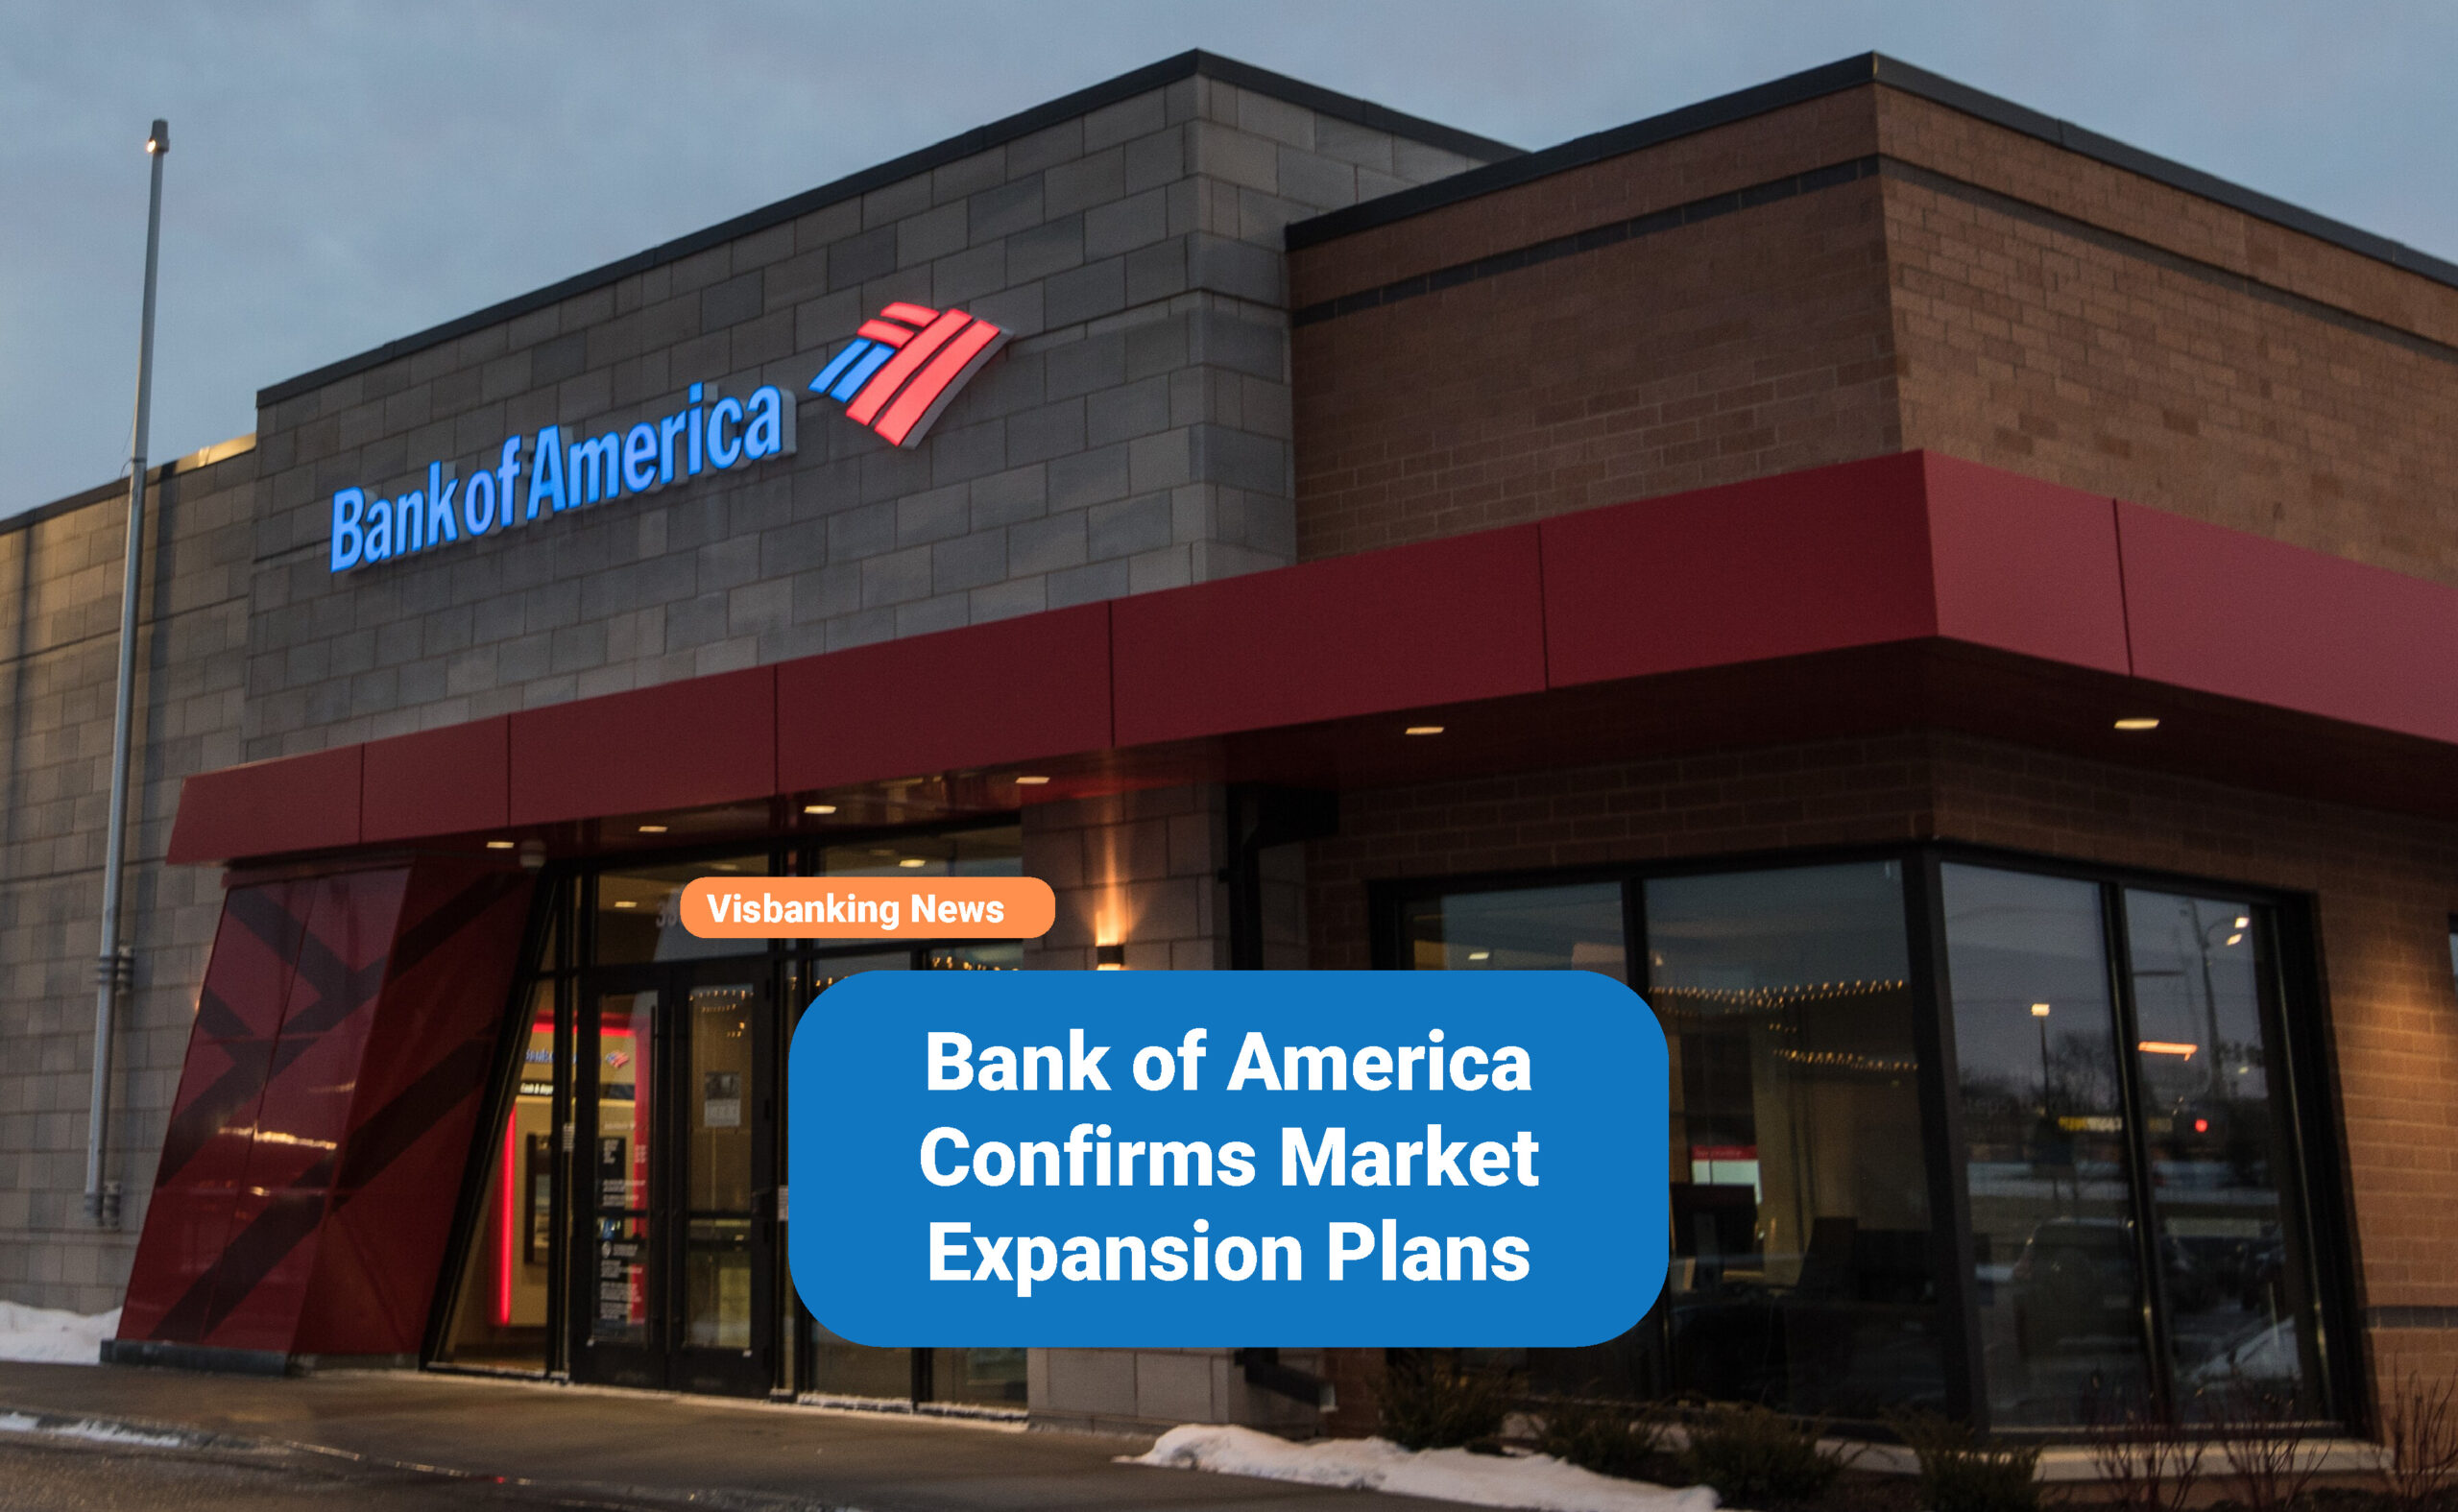 Bank of America Confirms Market Expansion Plans